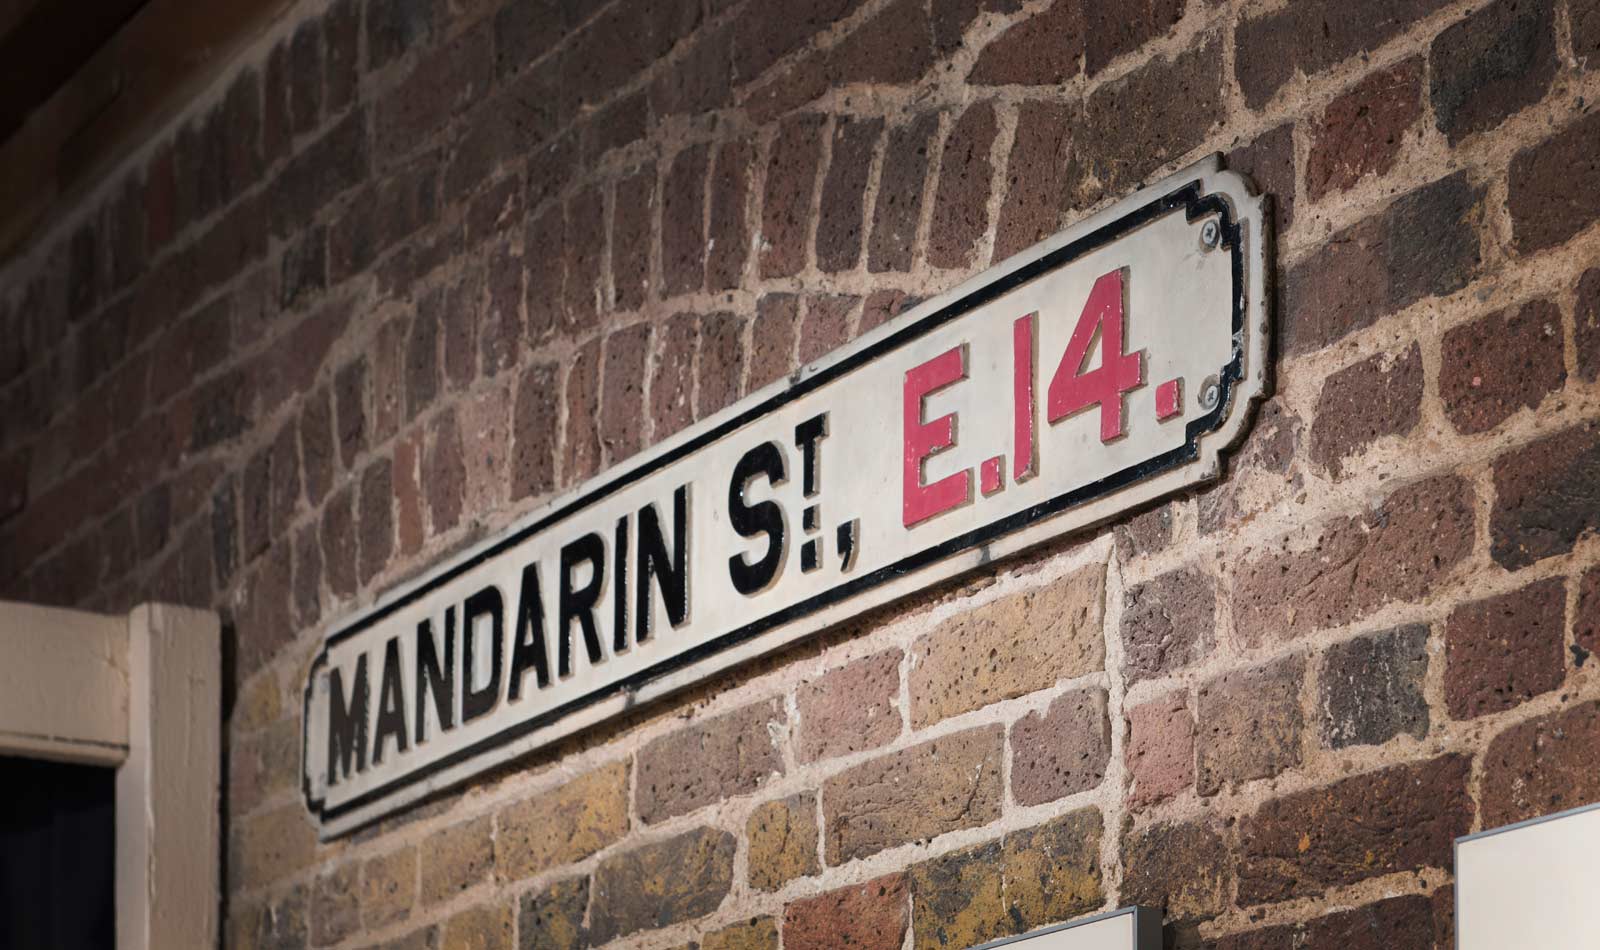 Street sign reading Mandarin Street, on display in the Museum of London Docklands.